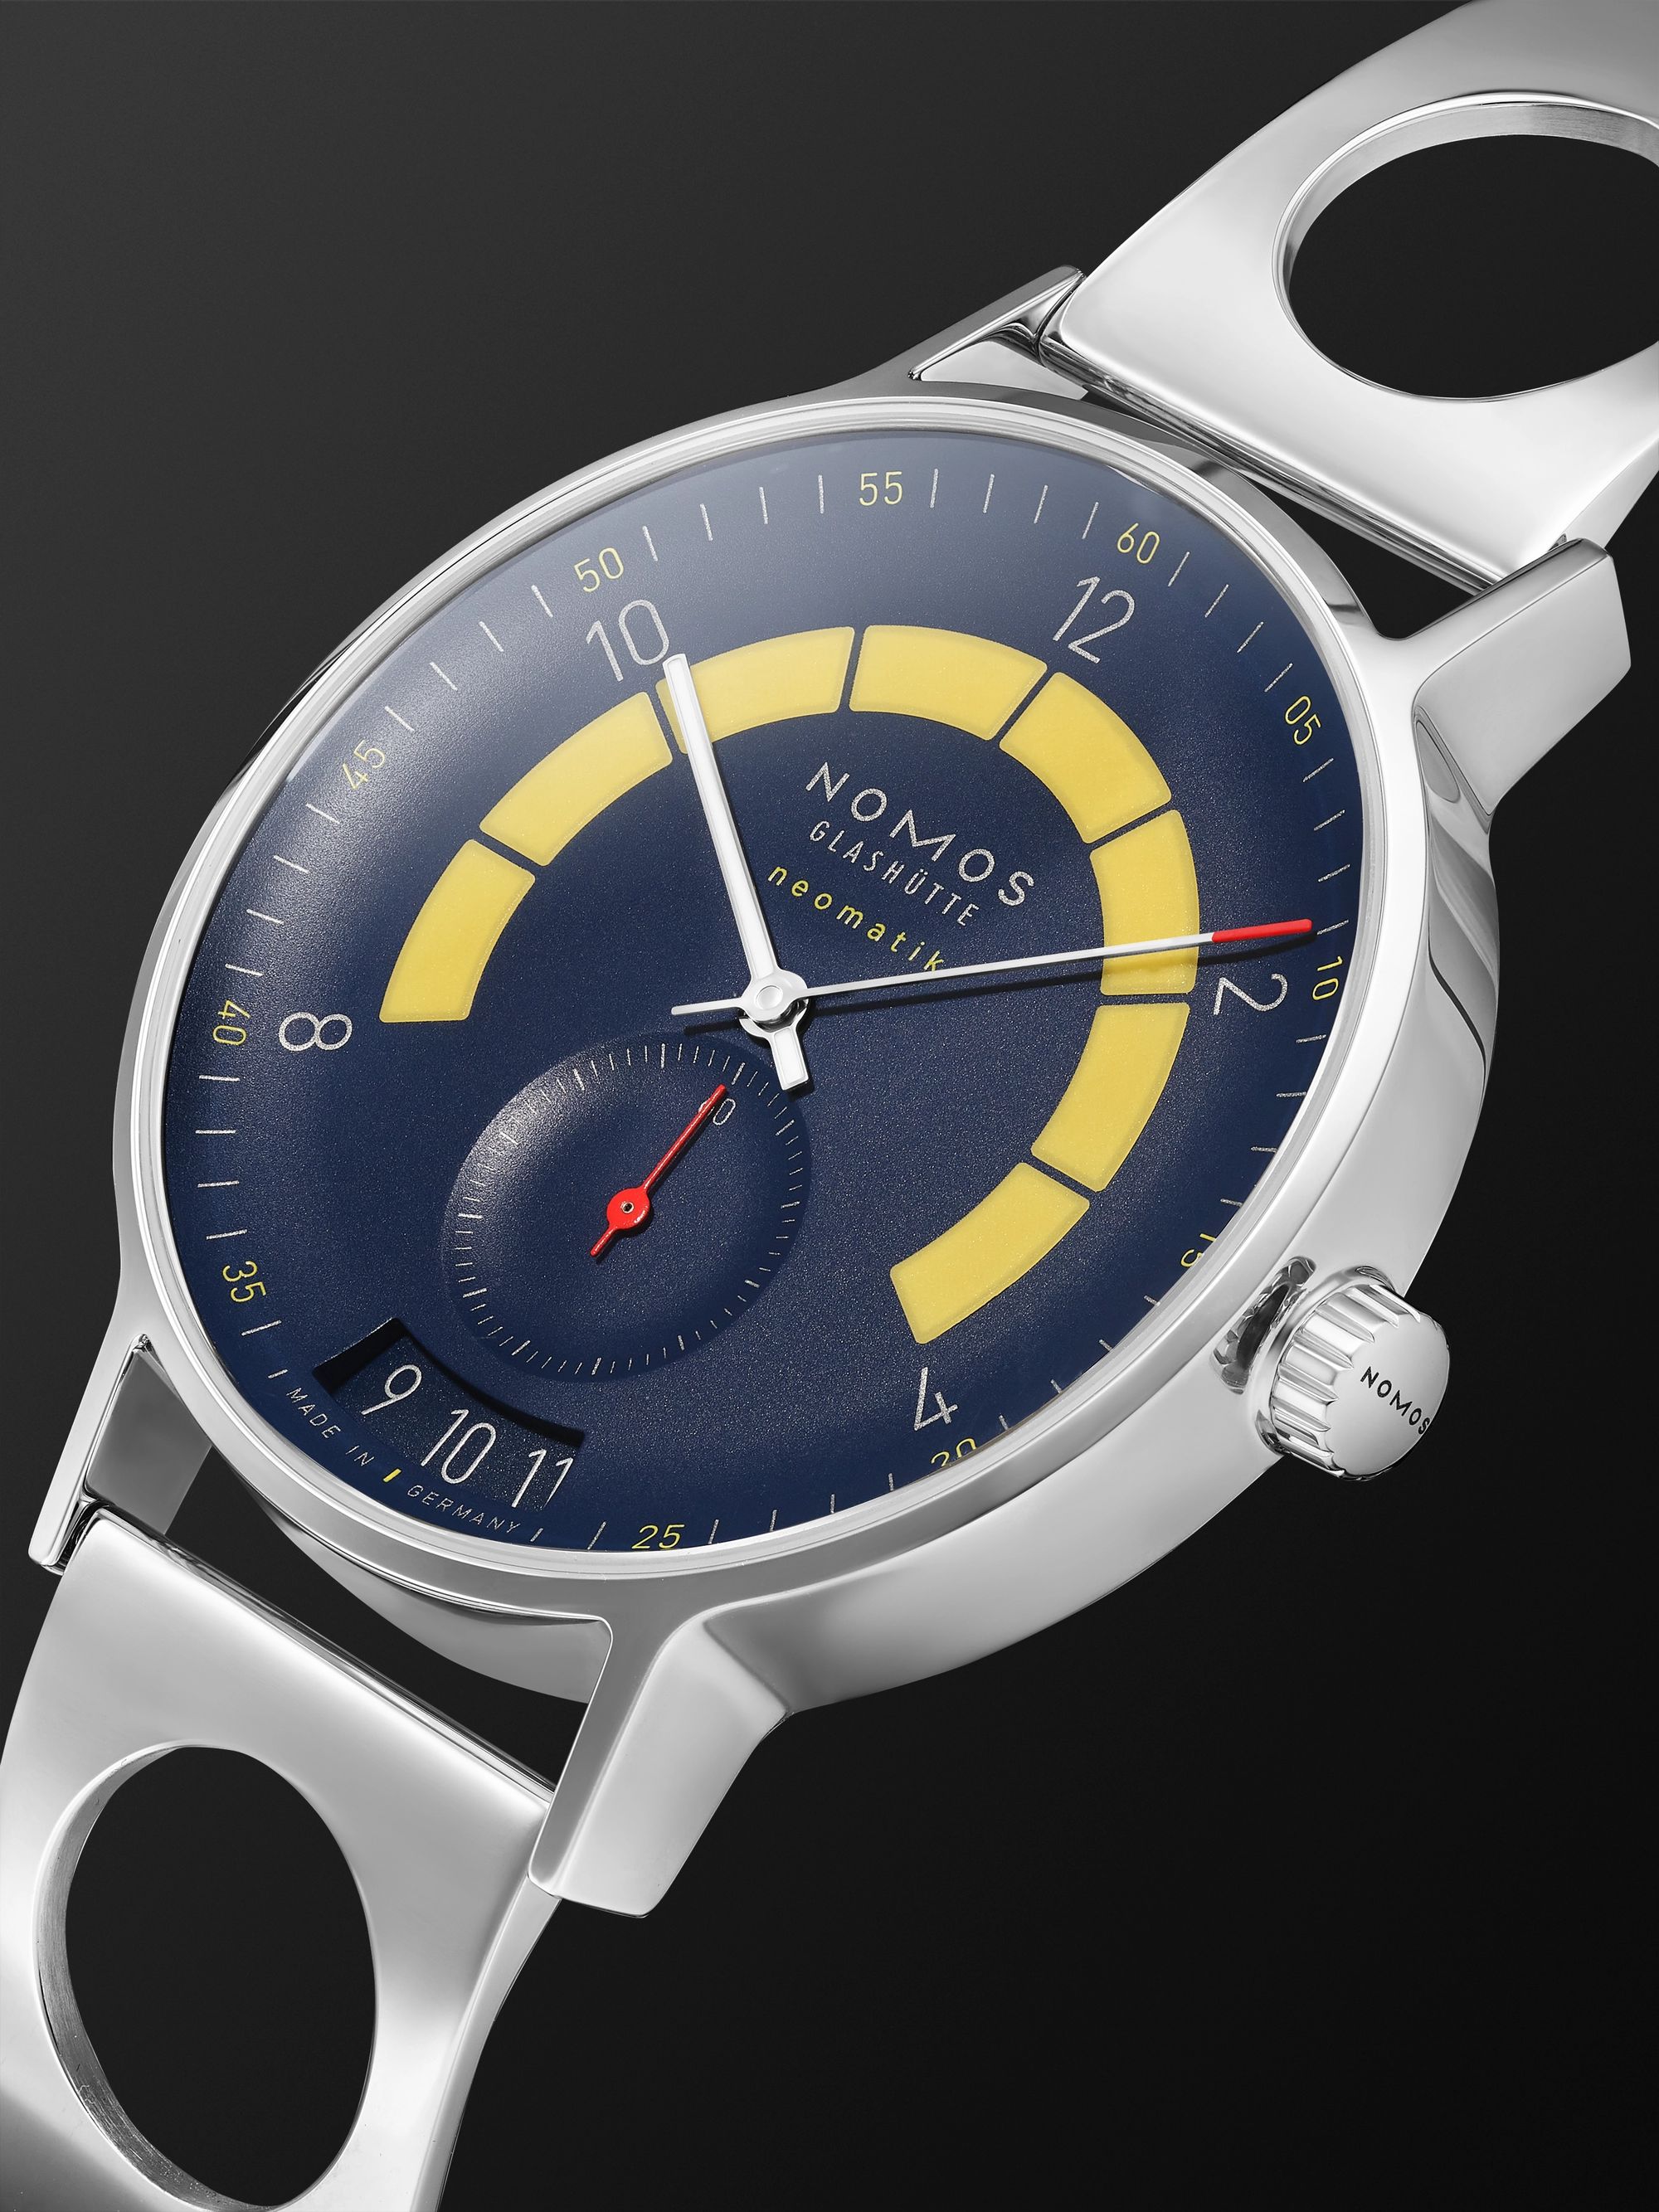 NOMOS GLASHÜTTE Autobahn Director's Cut A7 Limited Edition Automatic 41mm Stainless Steel Watch, Ref. No. 1301.S2